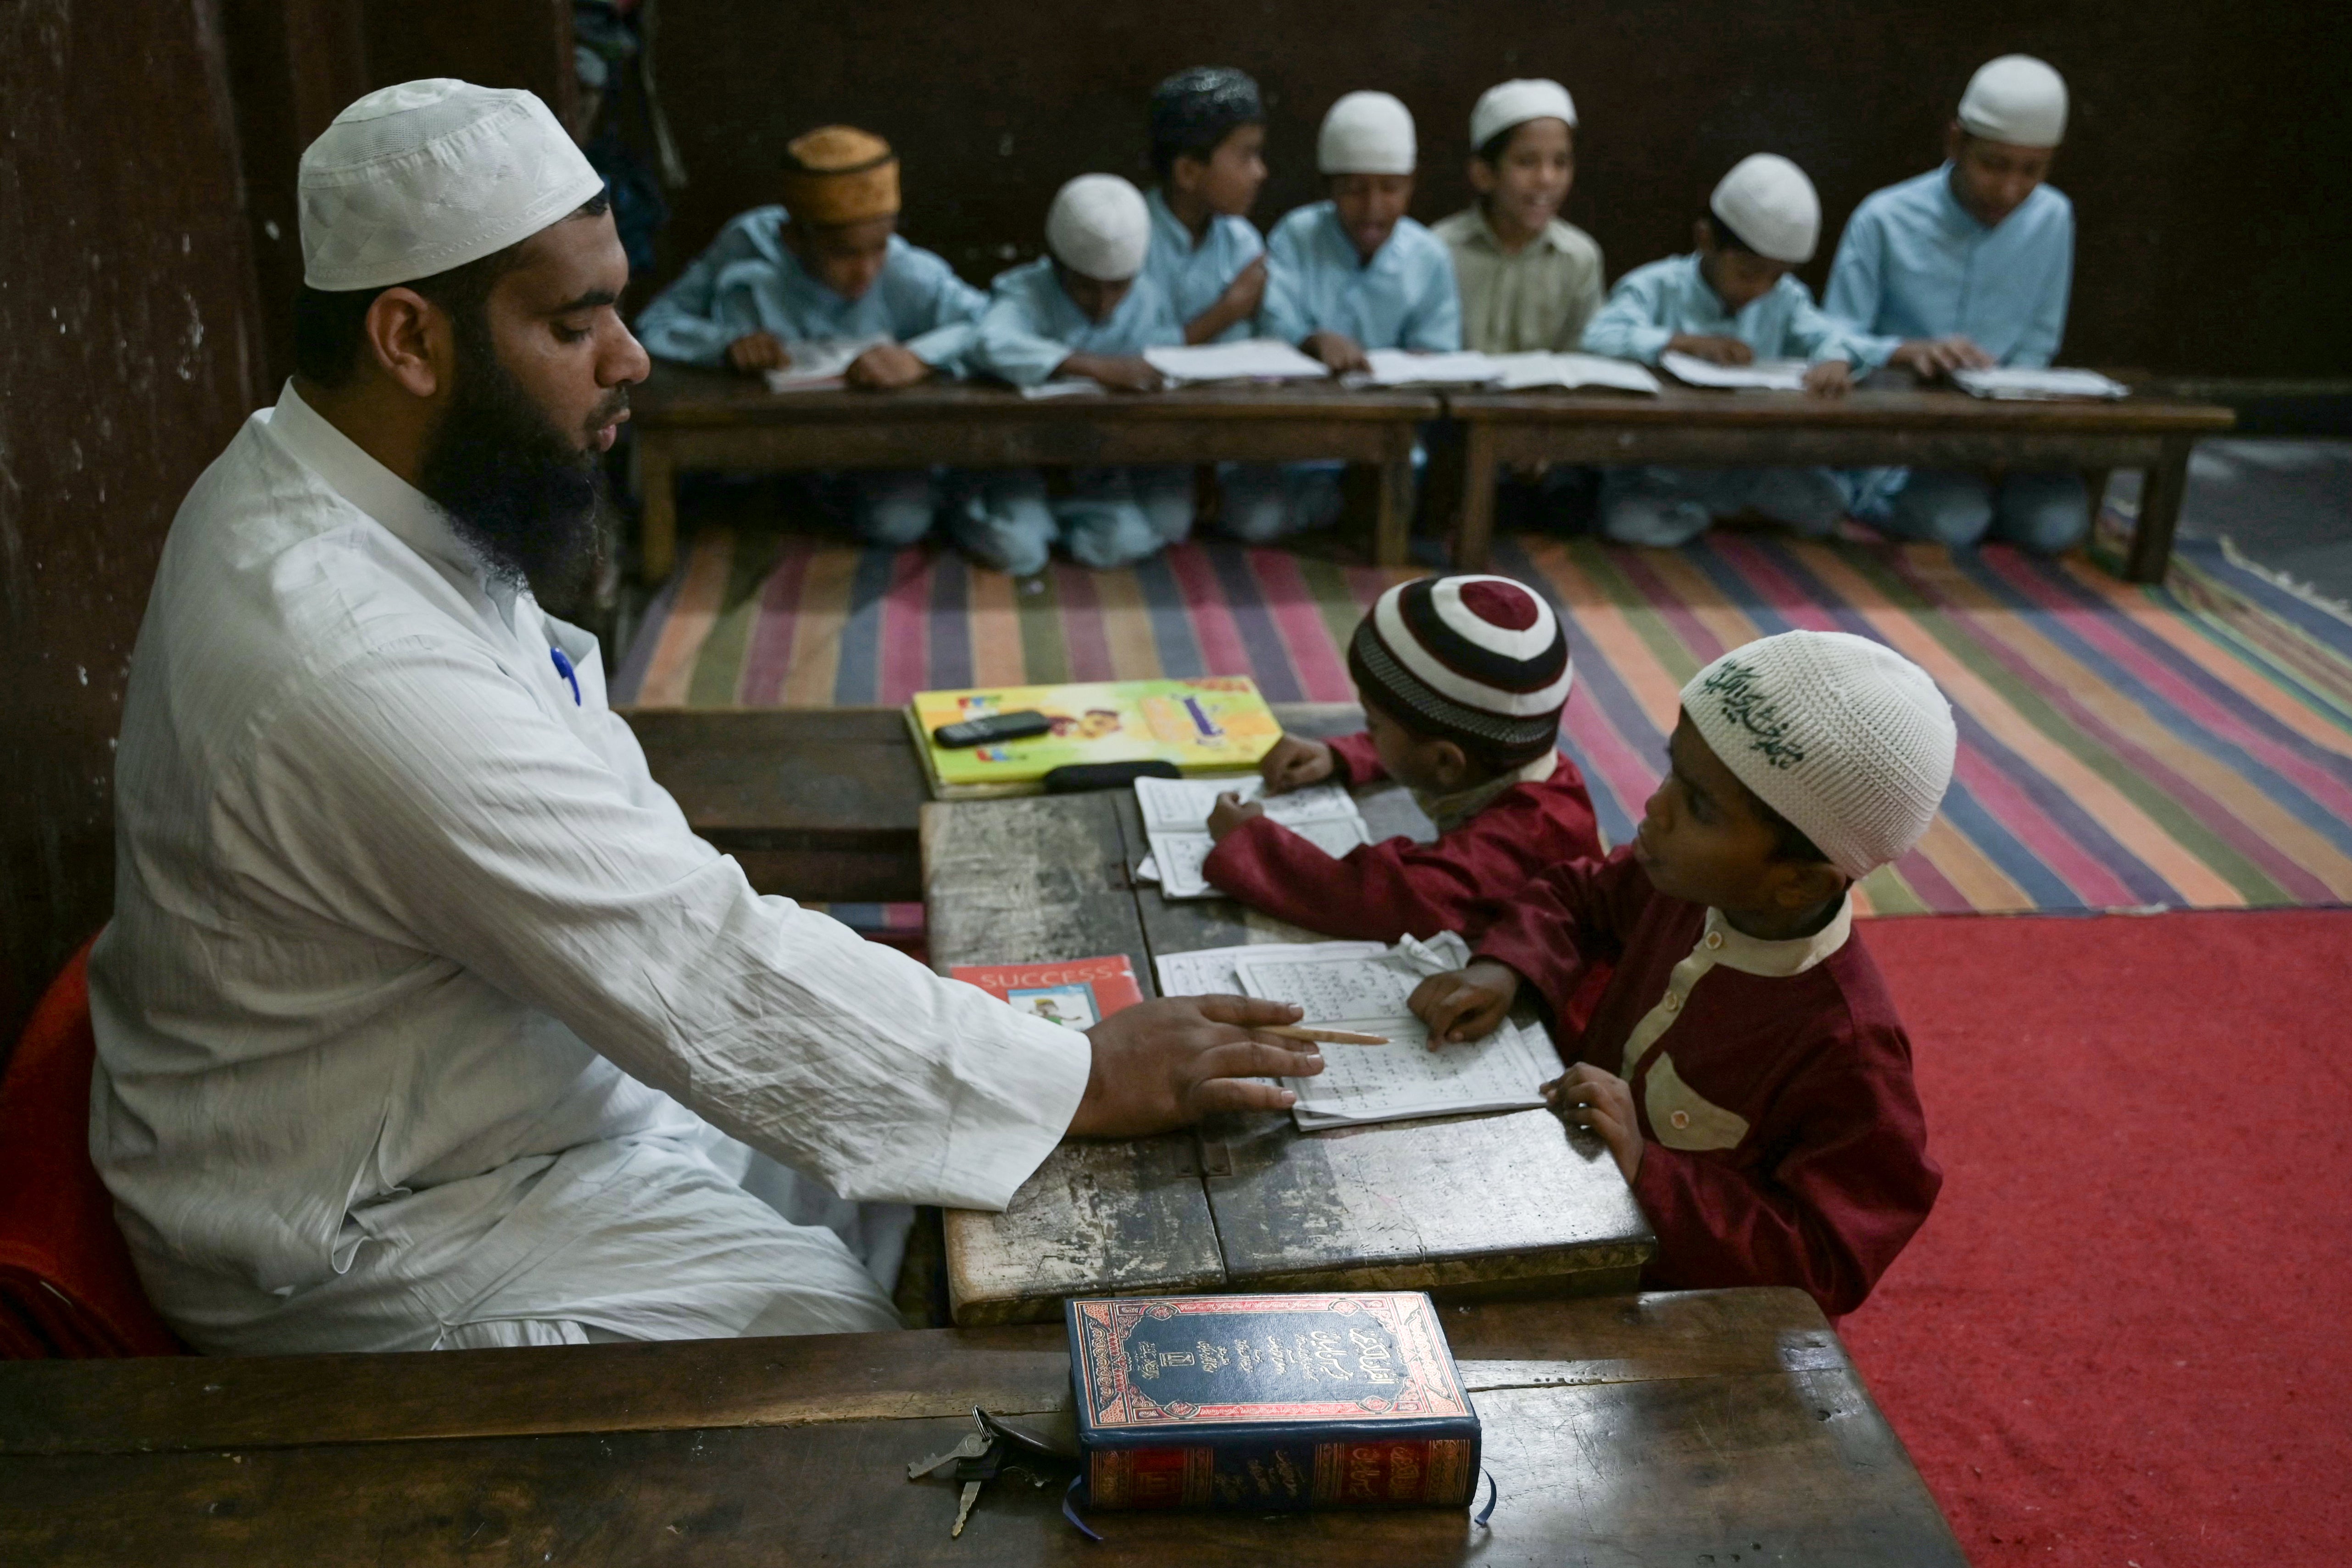 A teacher watches as students recite the Holy Quran in a classroom during the Islamic holy month of Ramadan